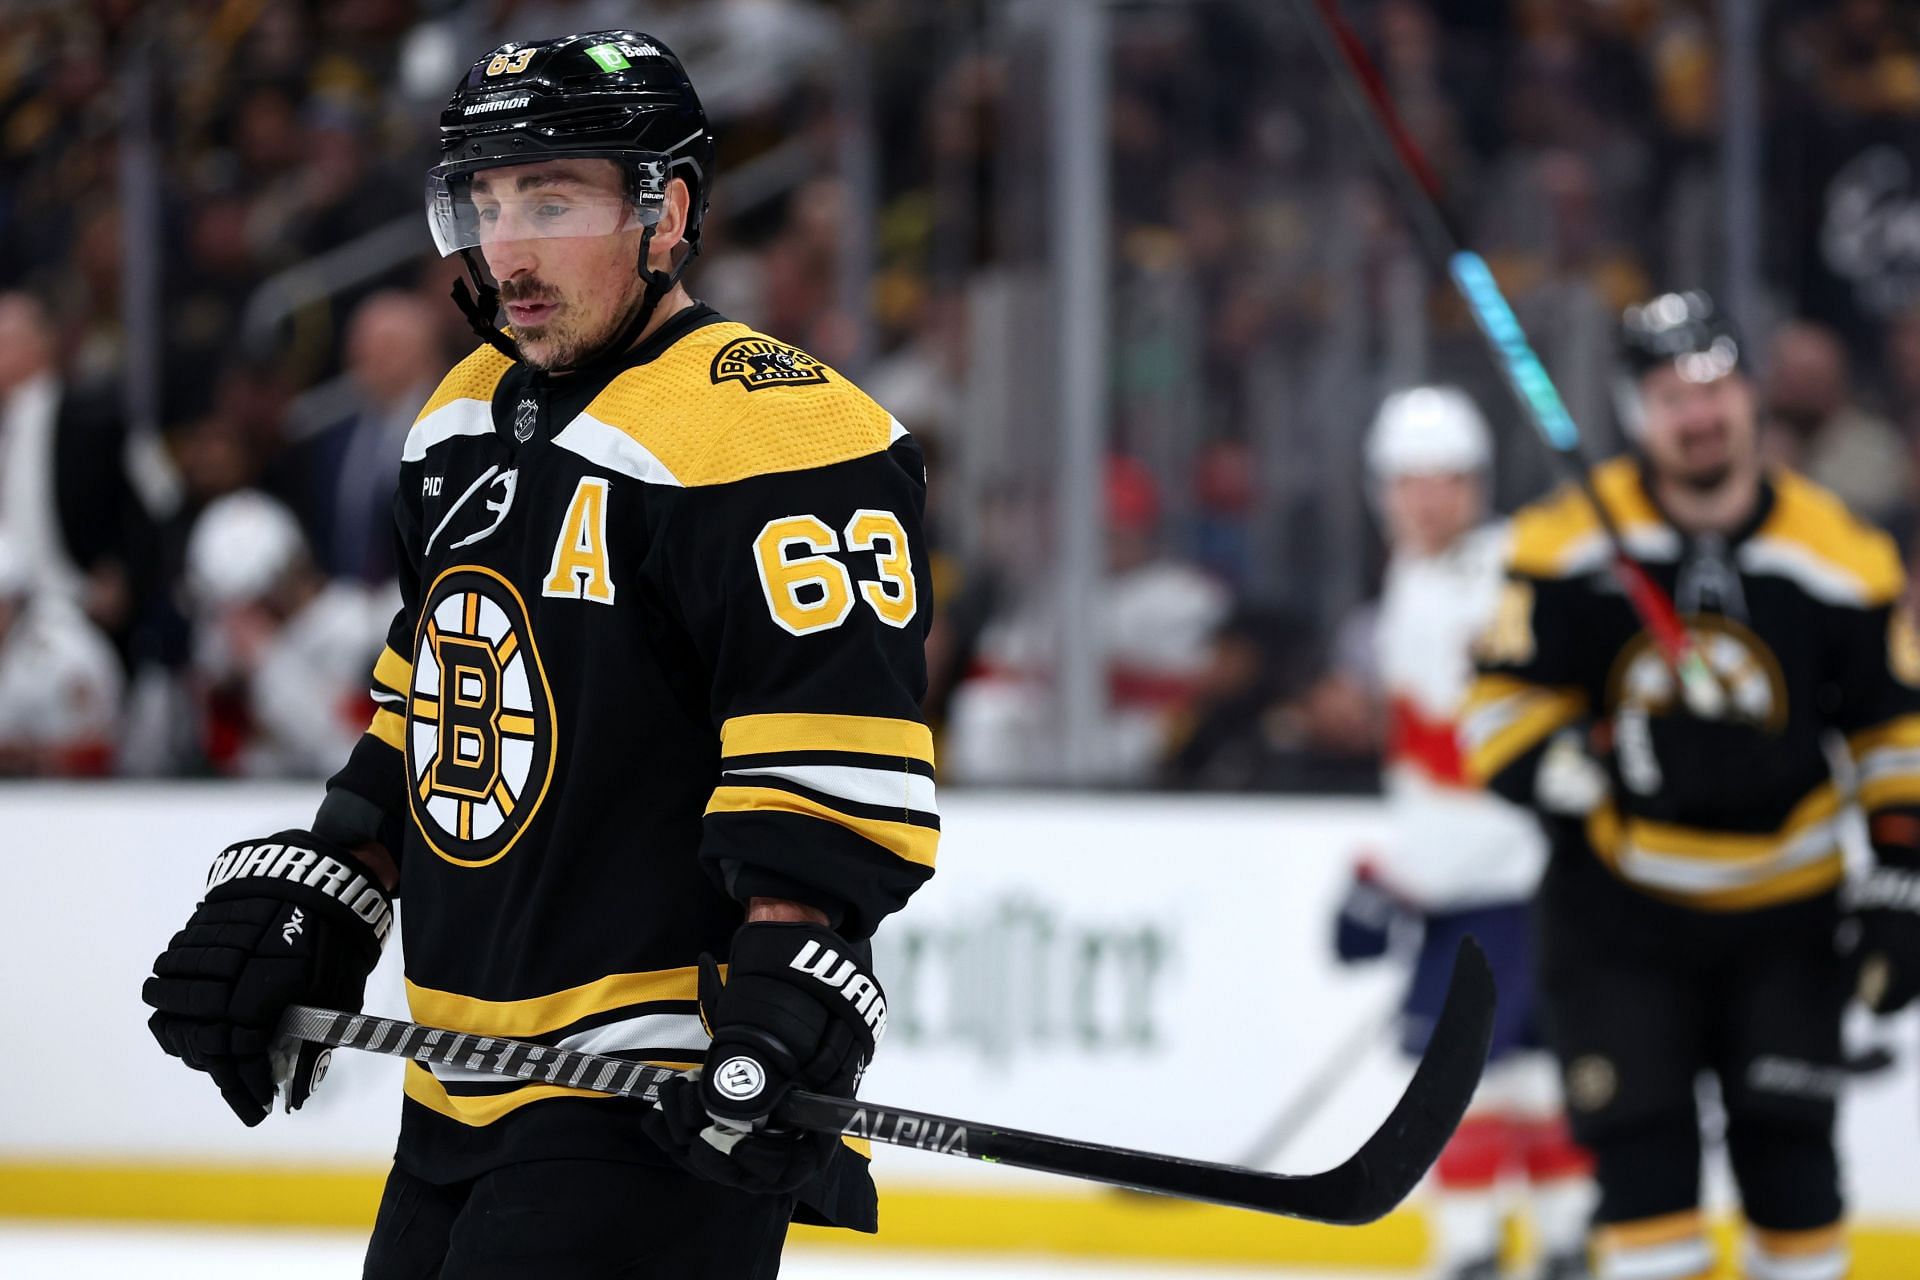 Bruins name Brad Marchand their next captain after Patrice